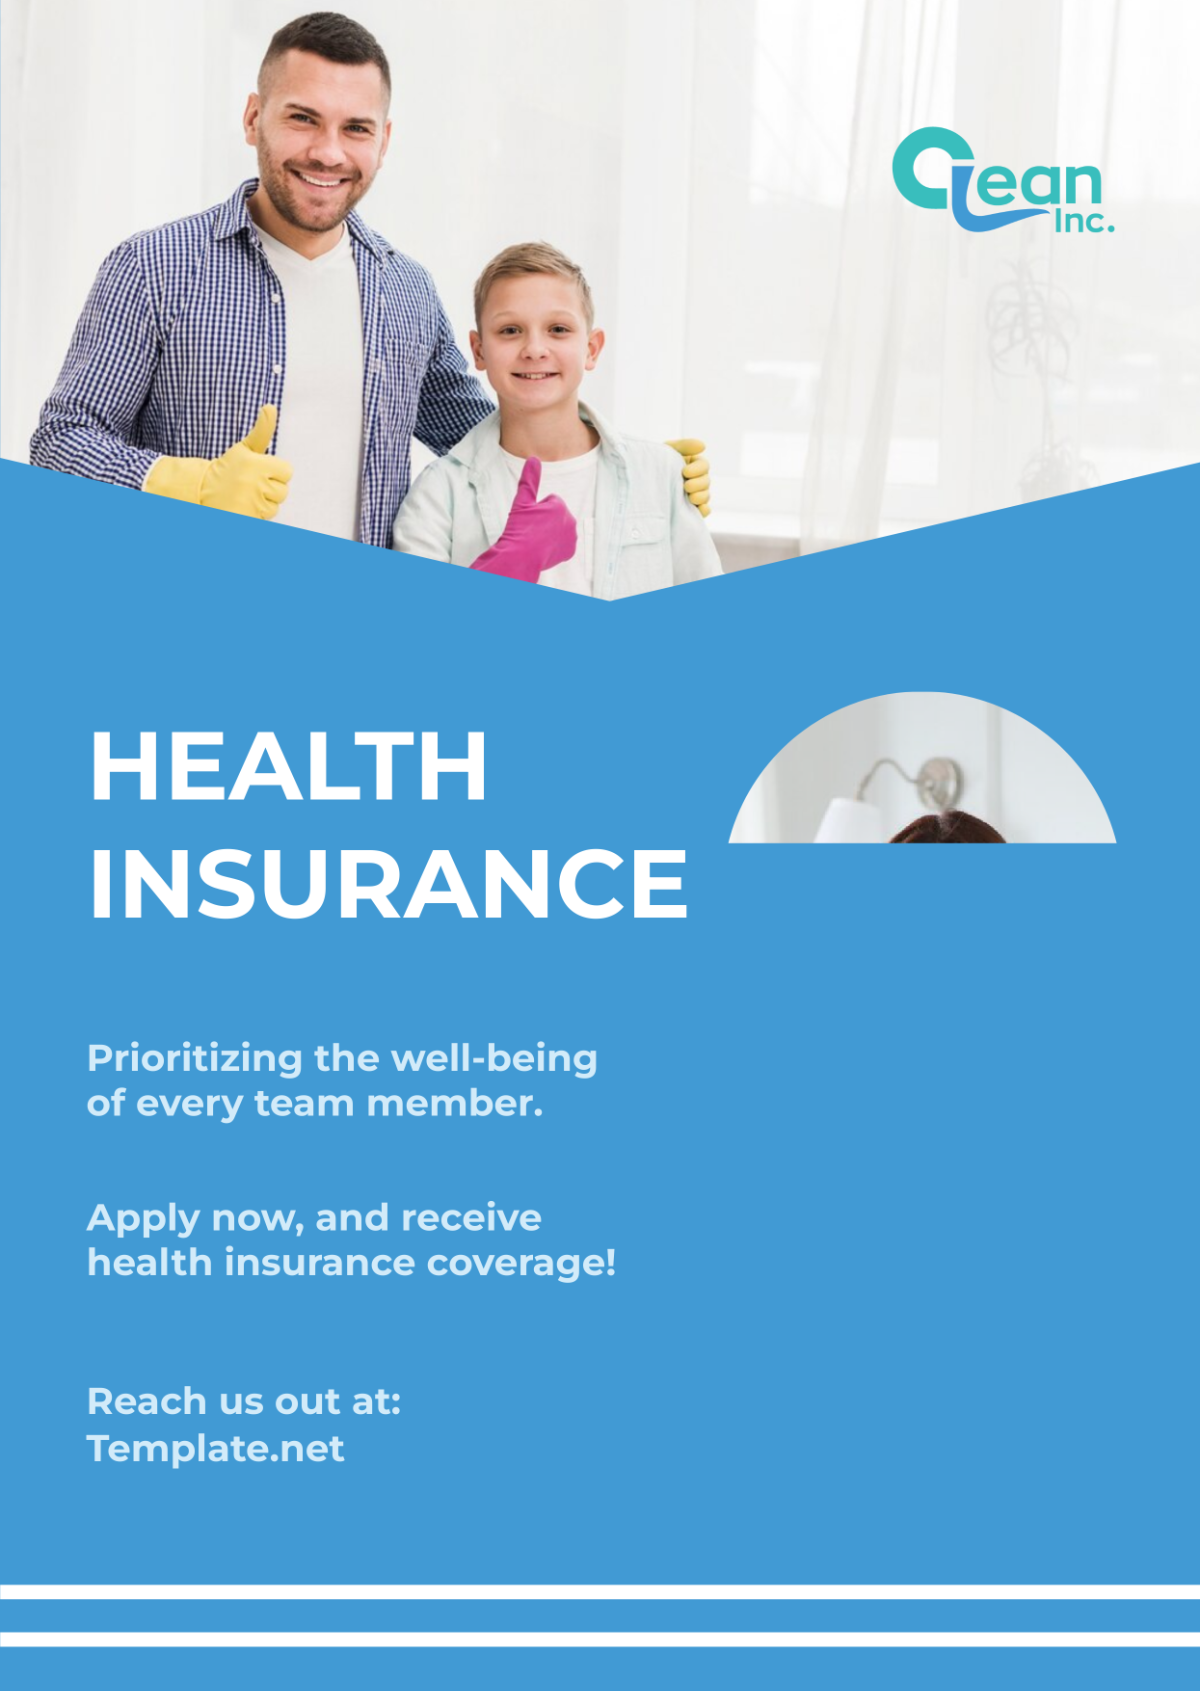 Free Cleaning Services Health Insurance Ad Template